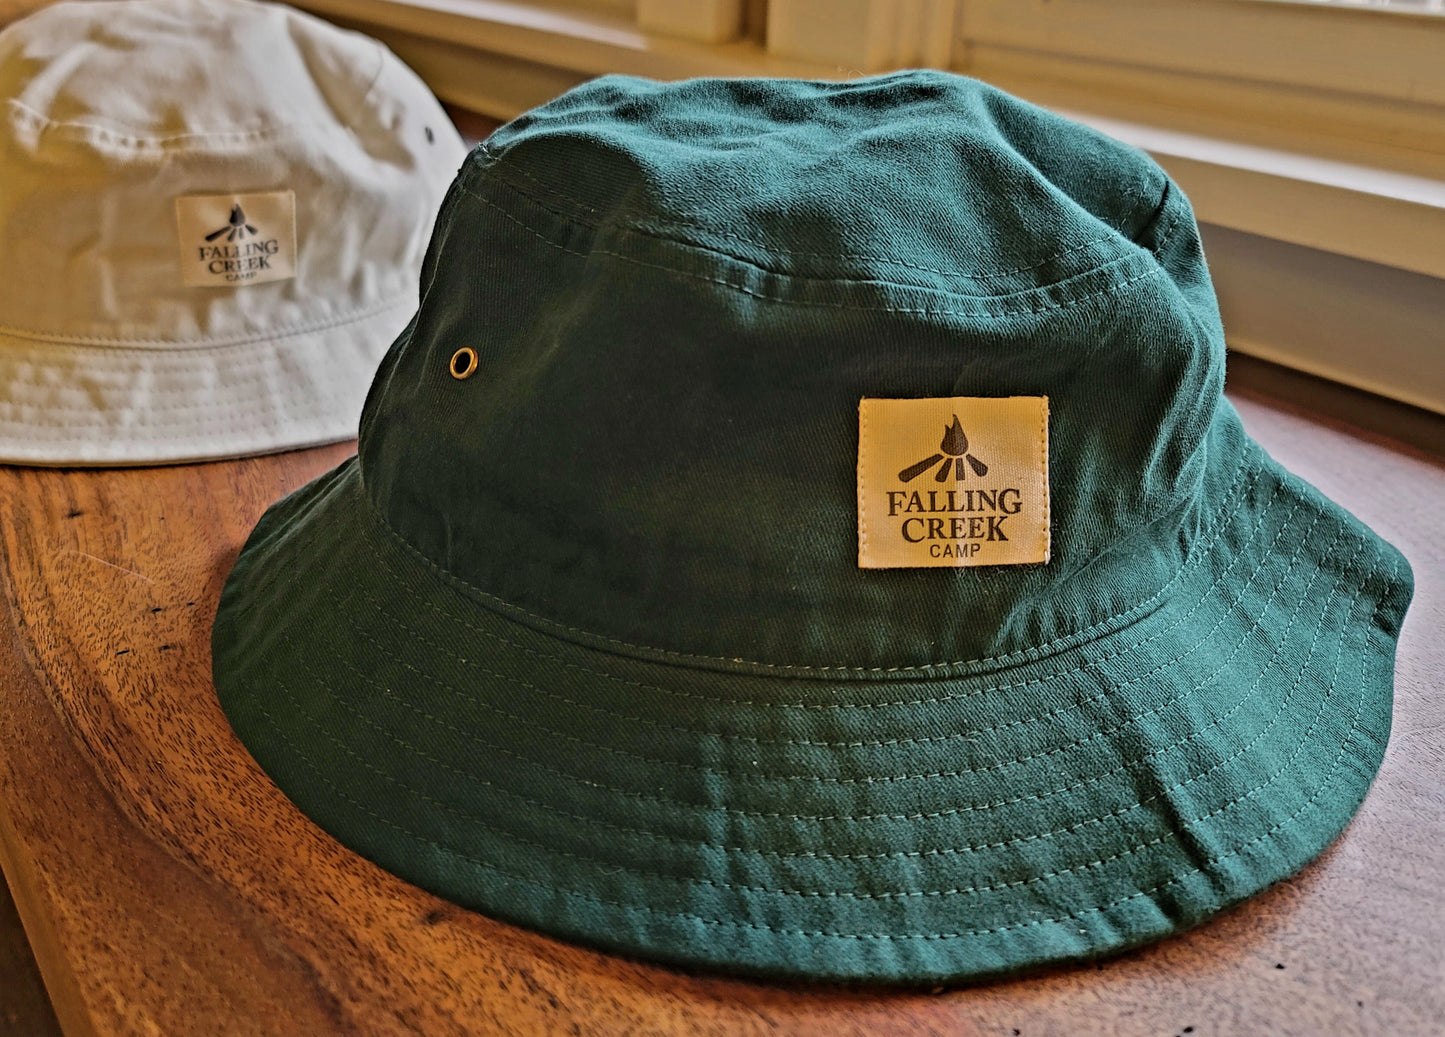 Forest green bucket hat with a tan logo on the front that reads "Falling Creek Camp" sits on a wooden bench in front of an identical hat in a tan color